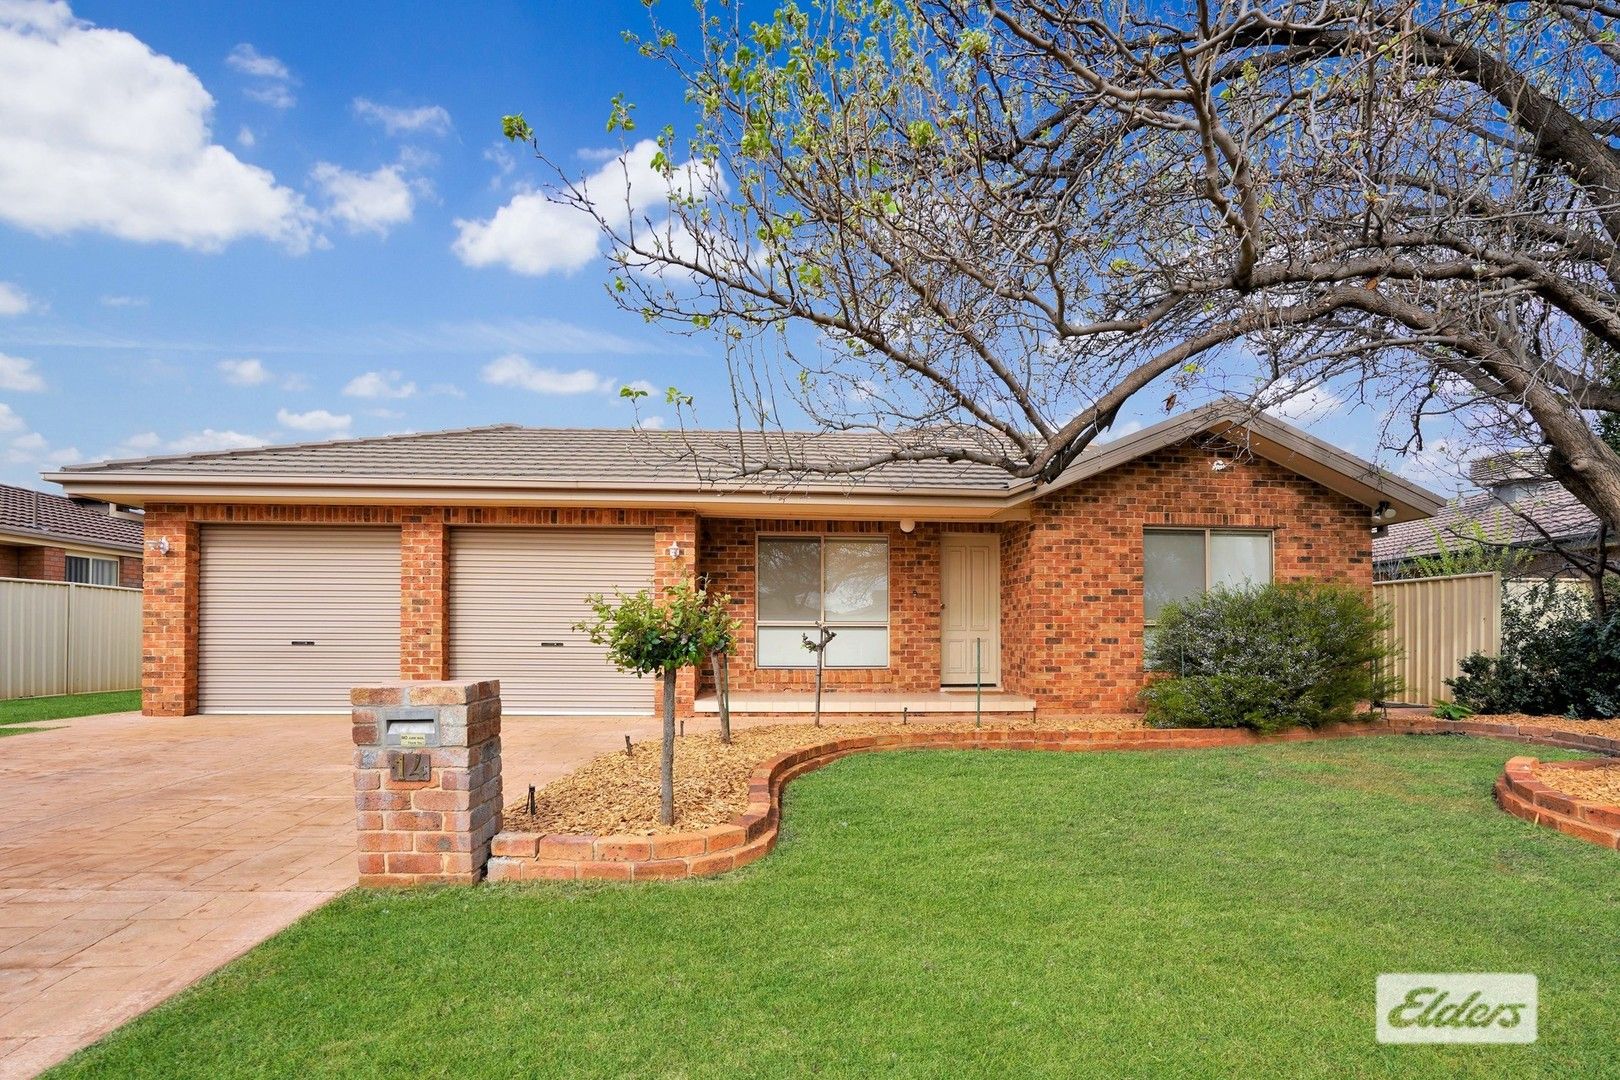 4 bedrooms House in 14 Little Road GRIFFITH NSW, 2680